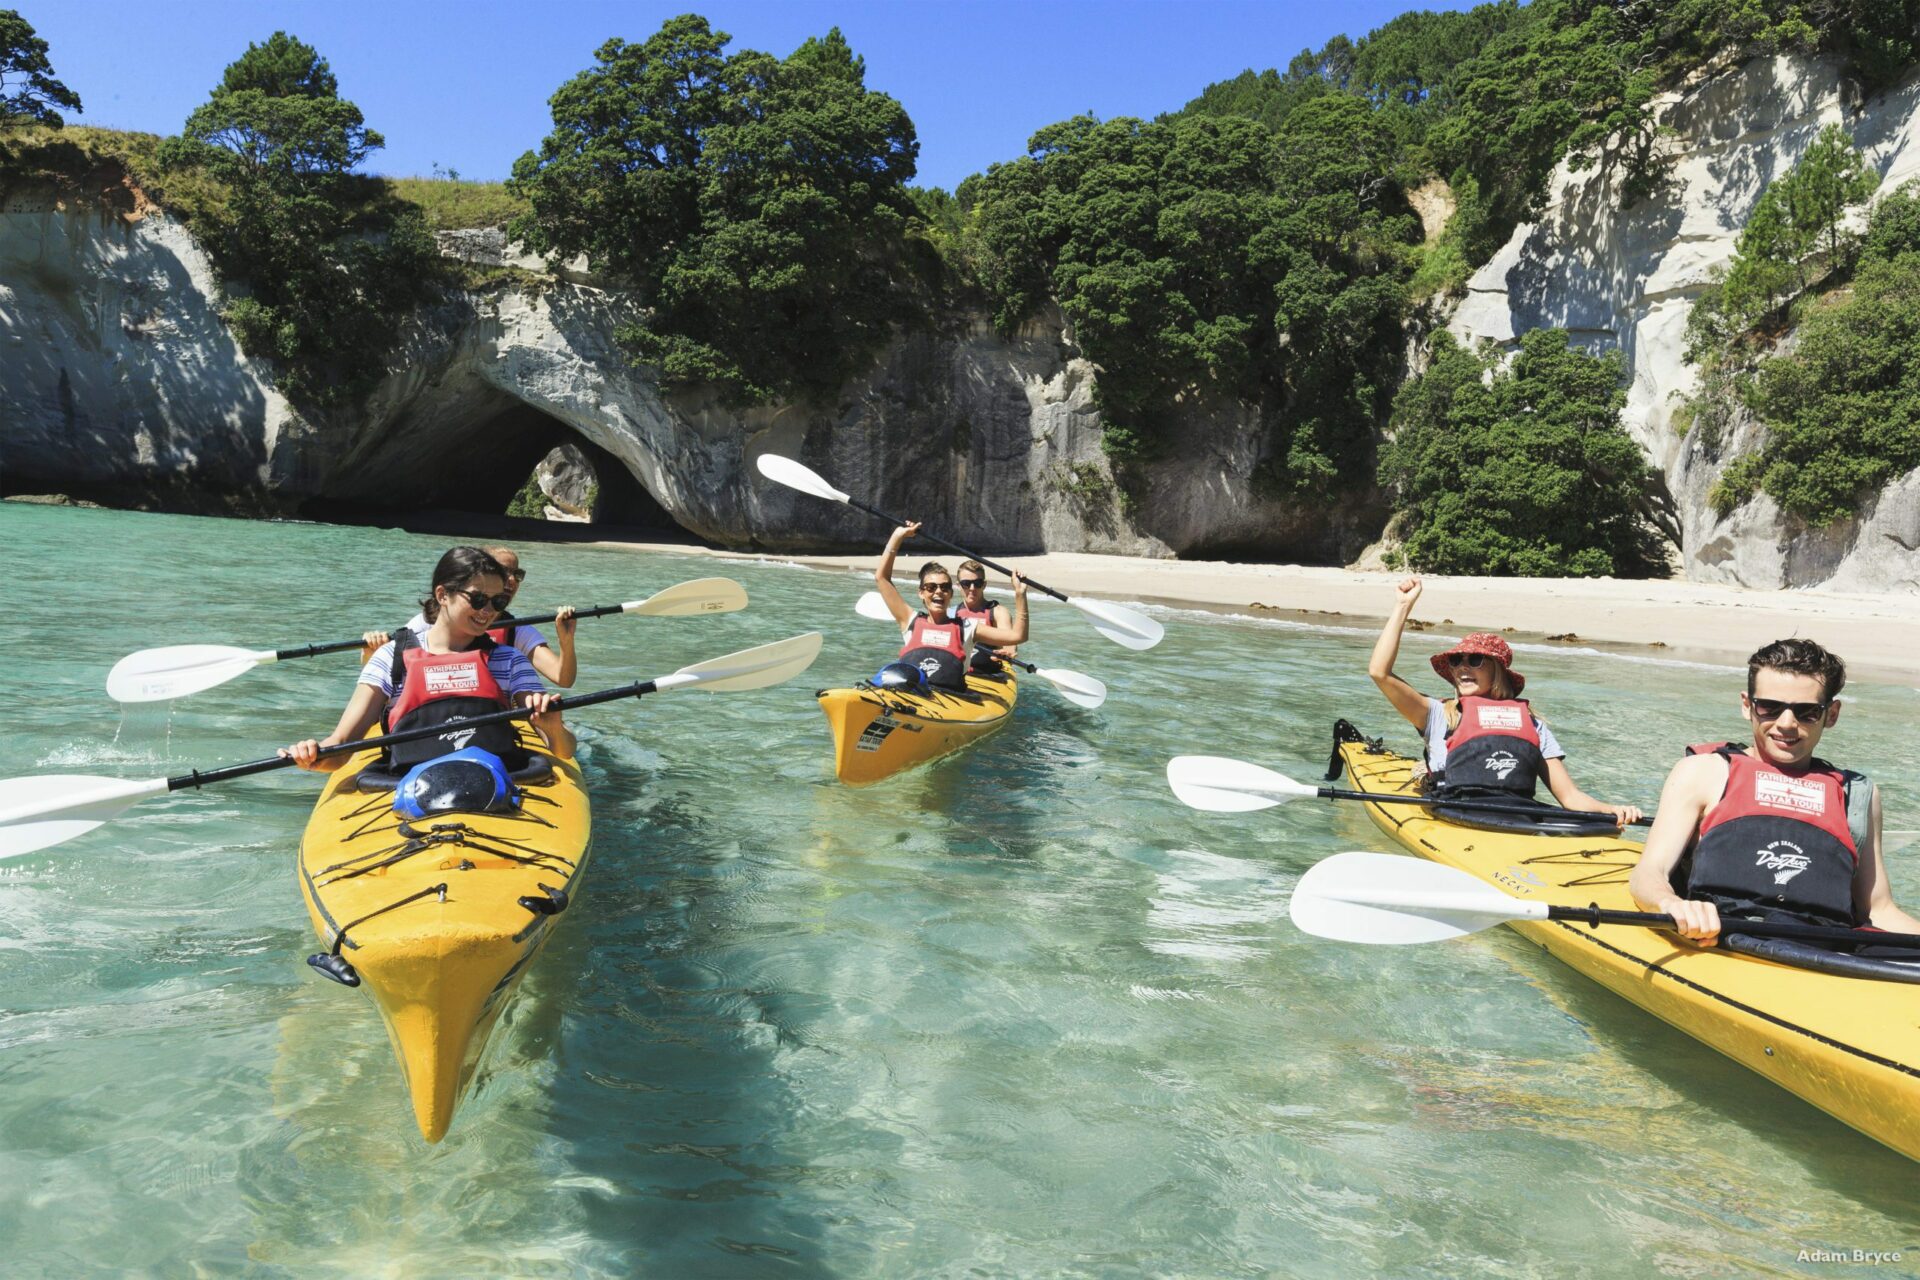 A group kayaking in the clear waters below some cliff faces in Coromandel.